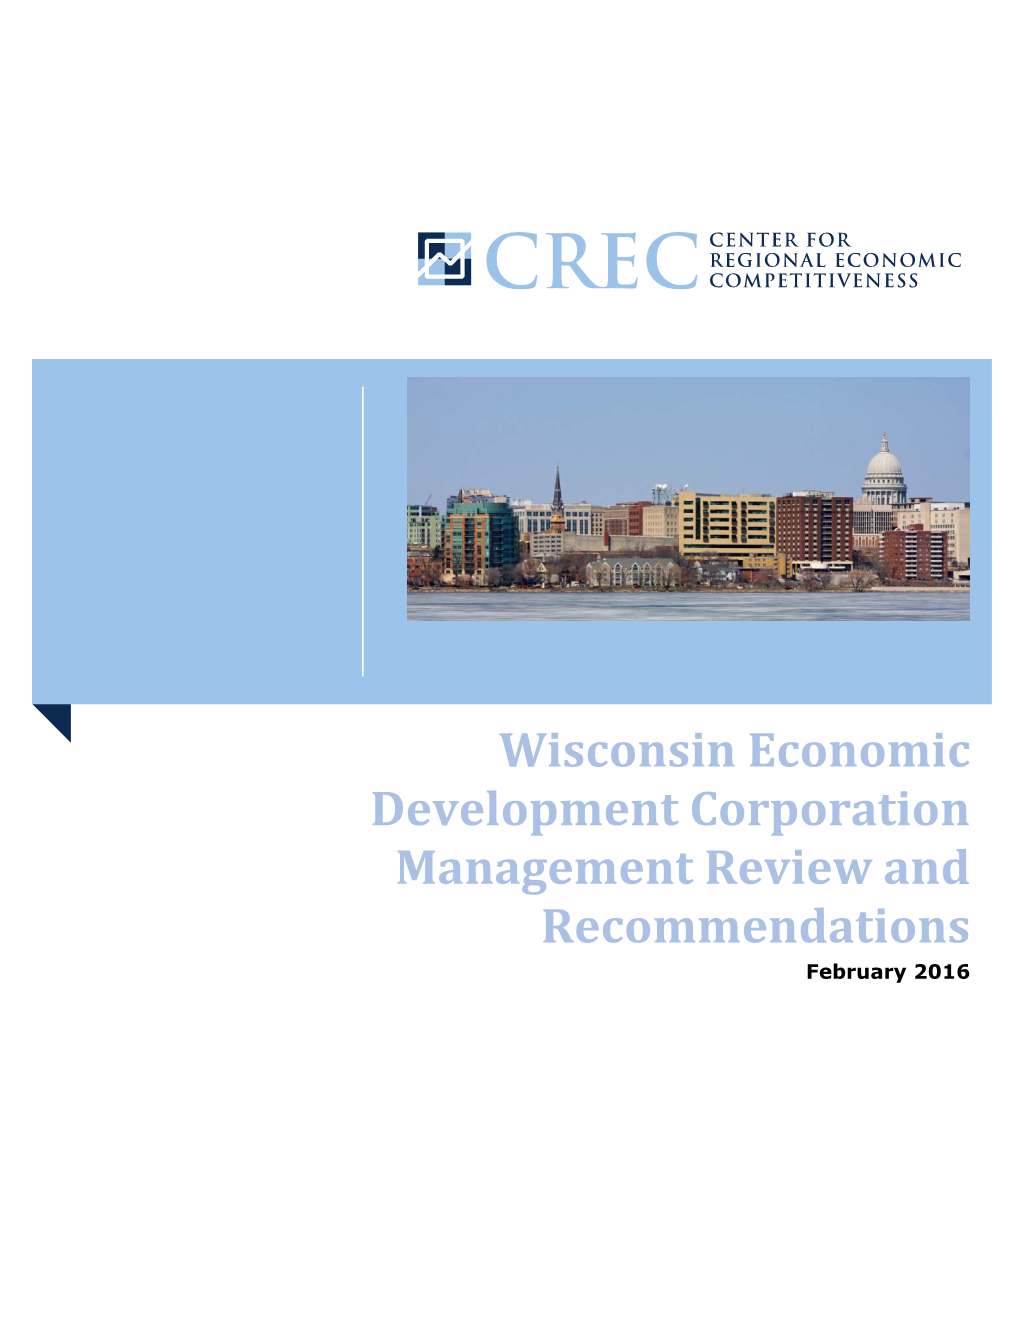 Wisconsin Economic Development Corporation Management Review and Recommendations February 2016 WEDC Management Plan and Recommendations